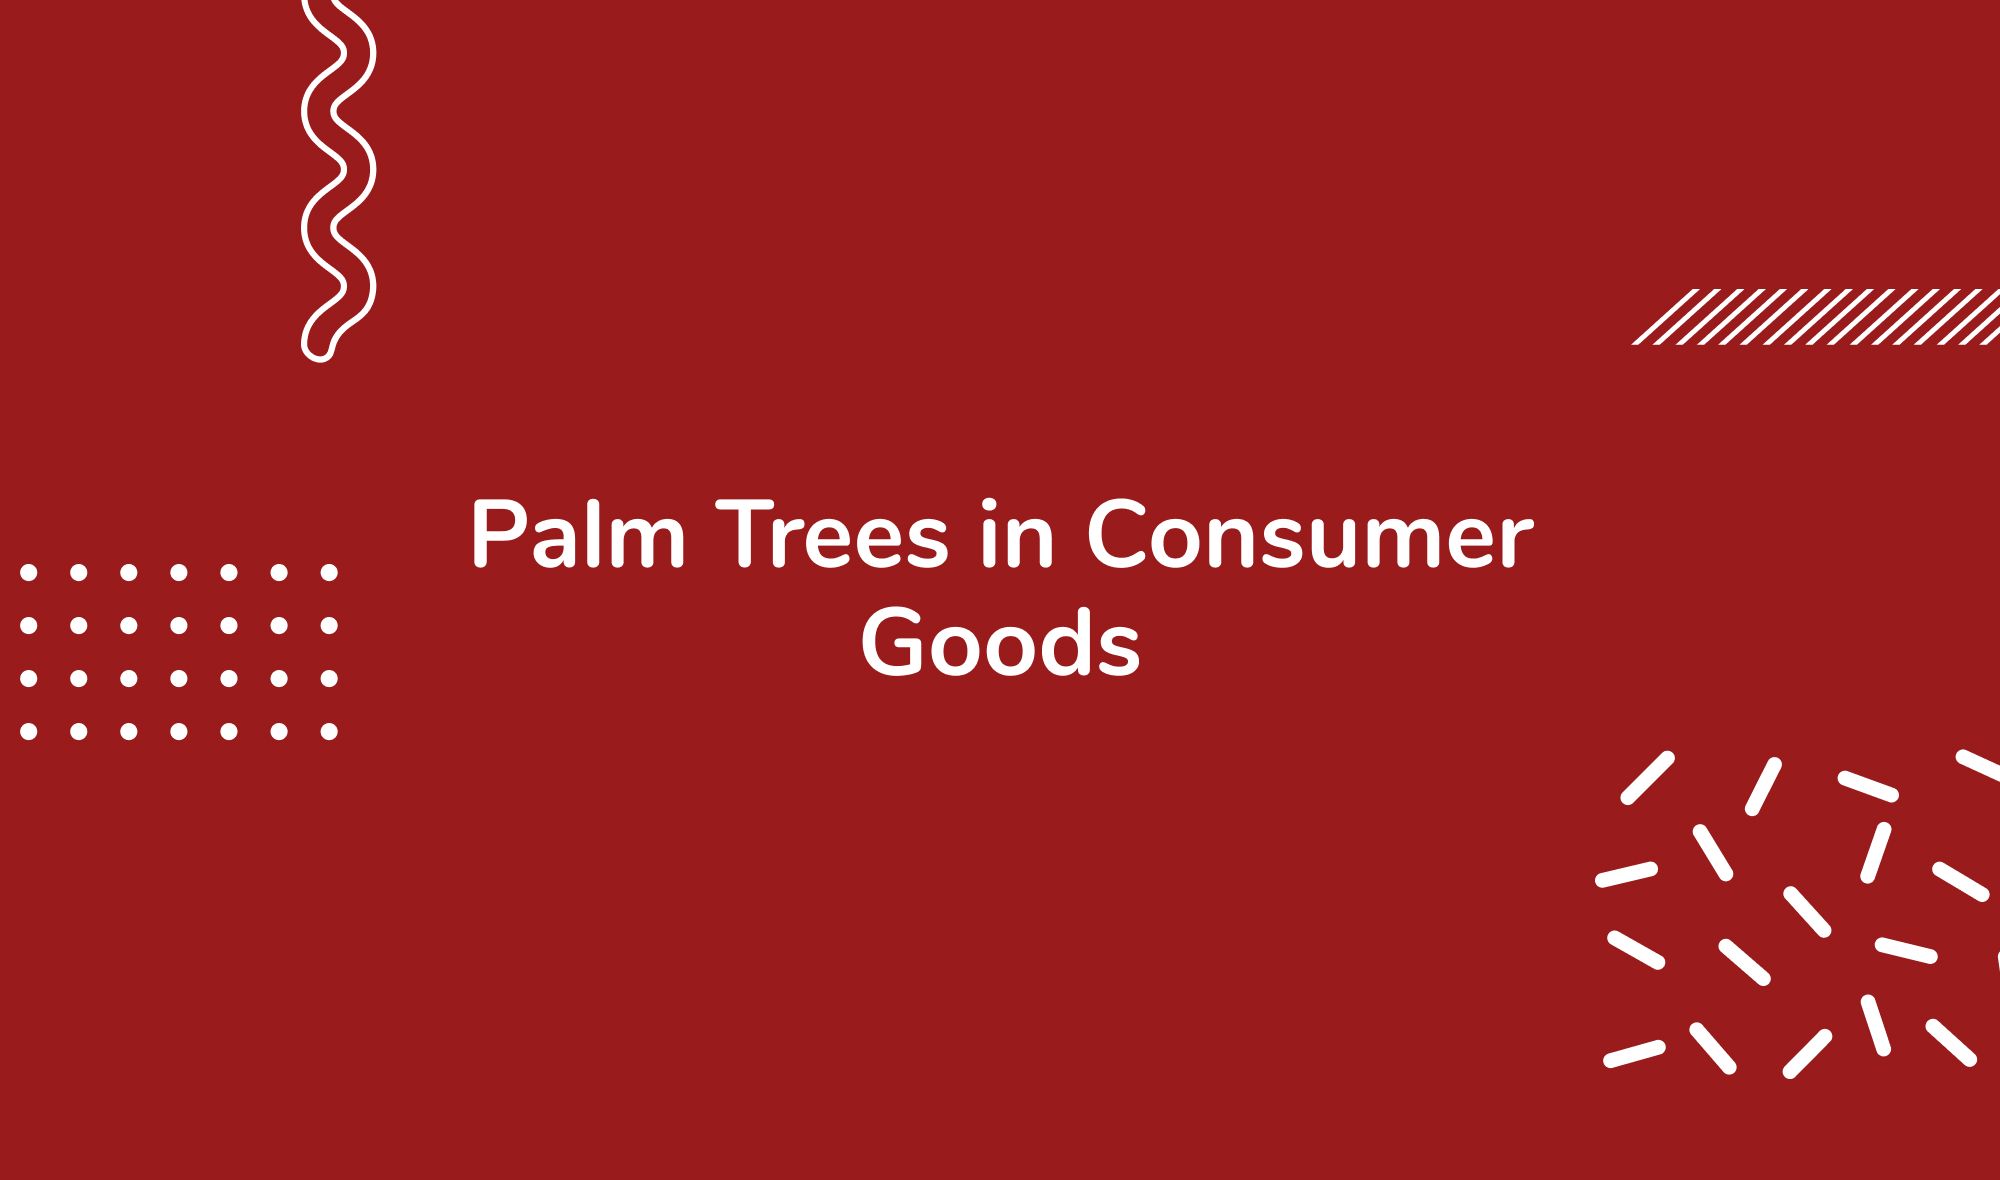 Palm Trees in Consumer Goods